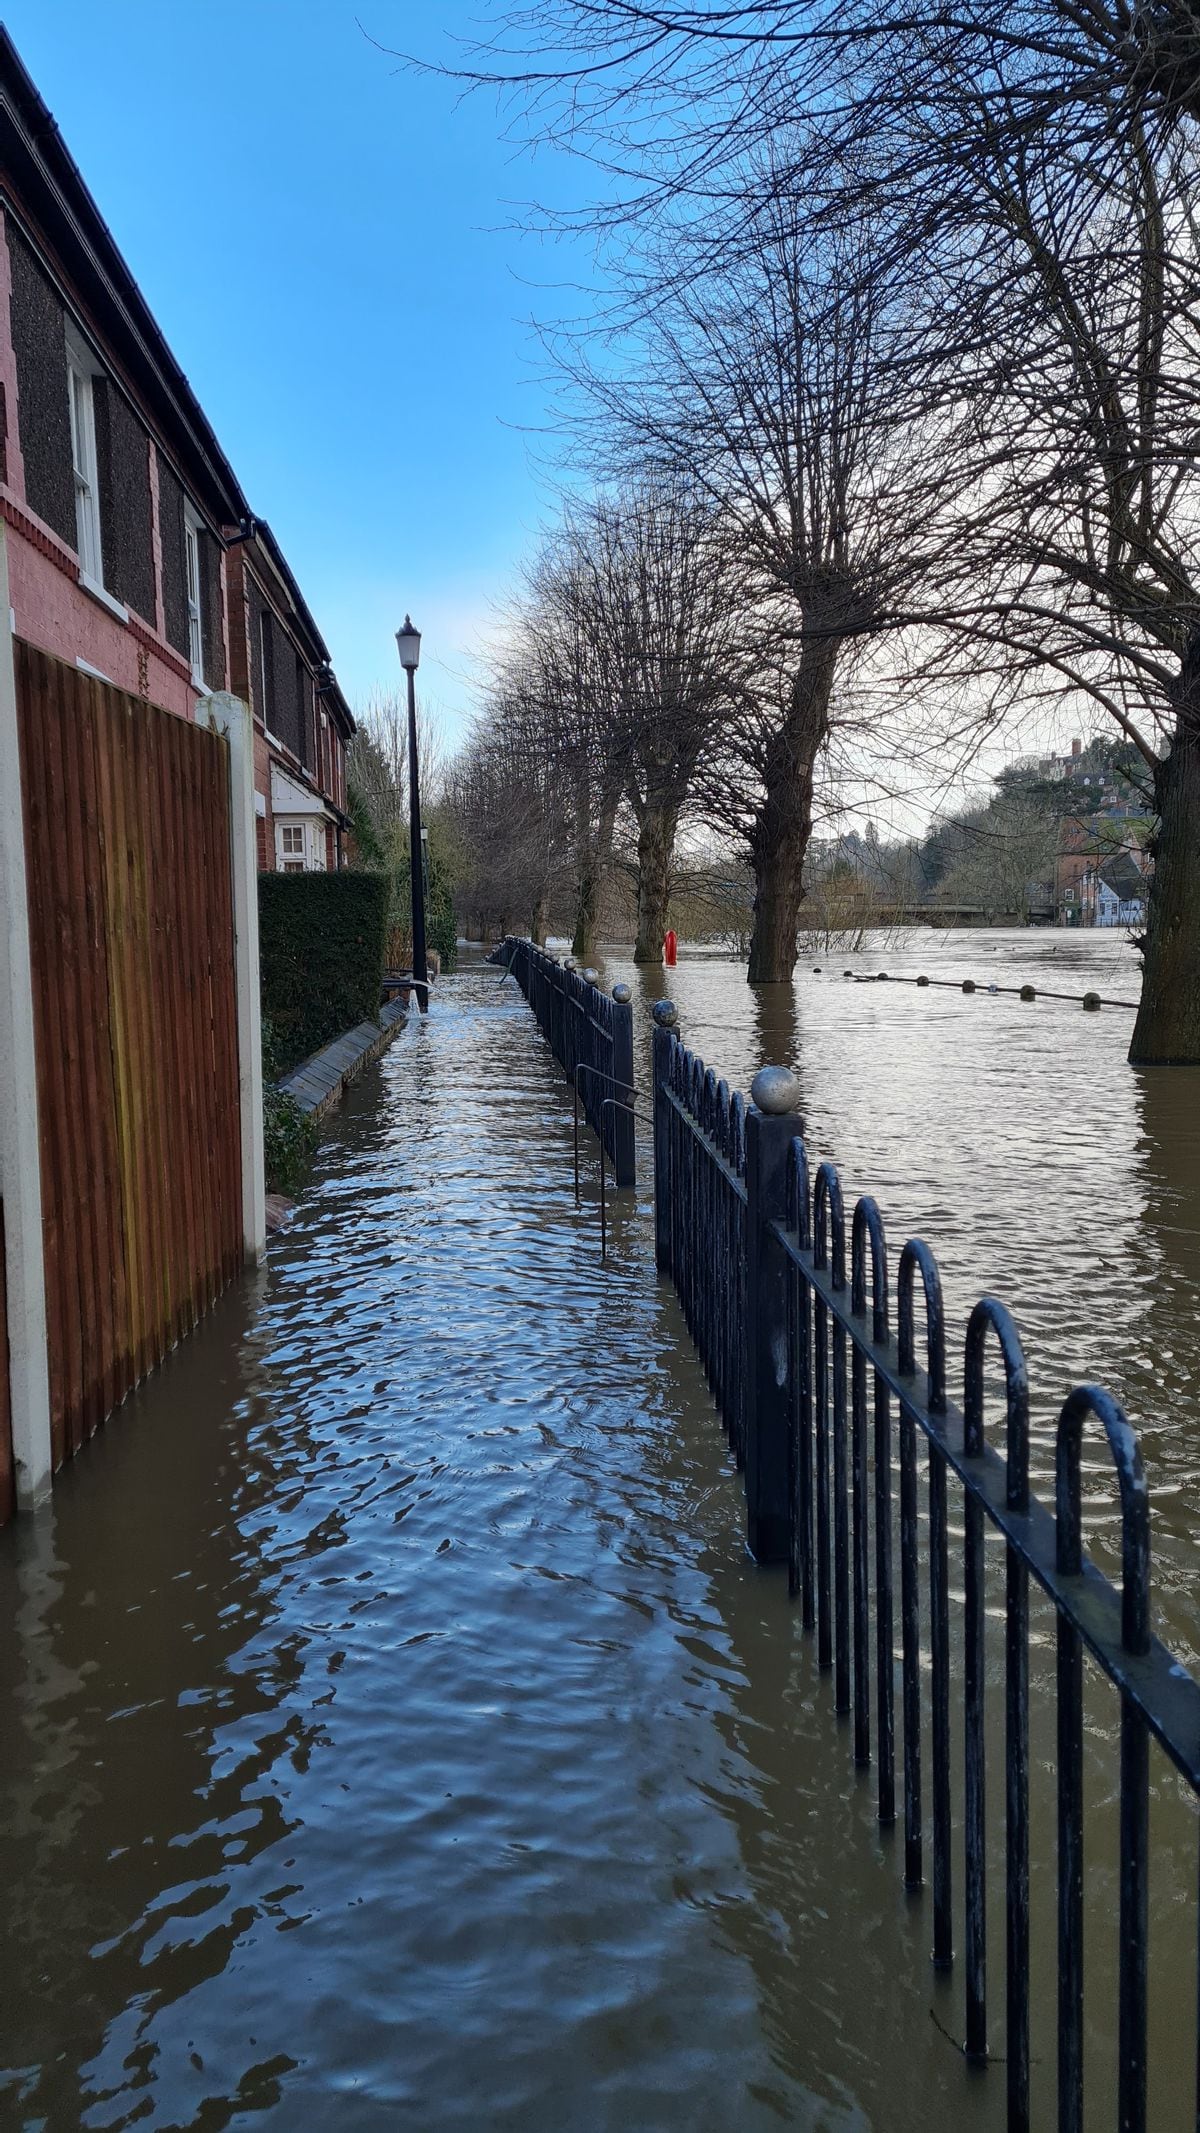 The impact of flooding at Severn Terrace